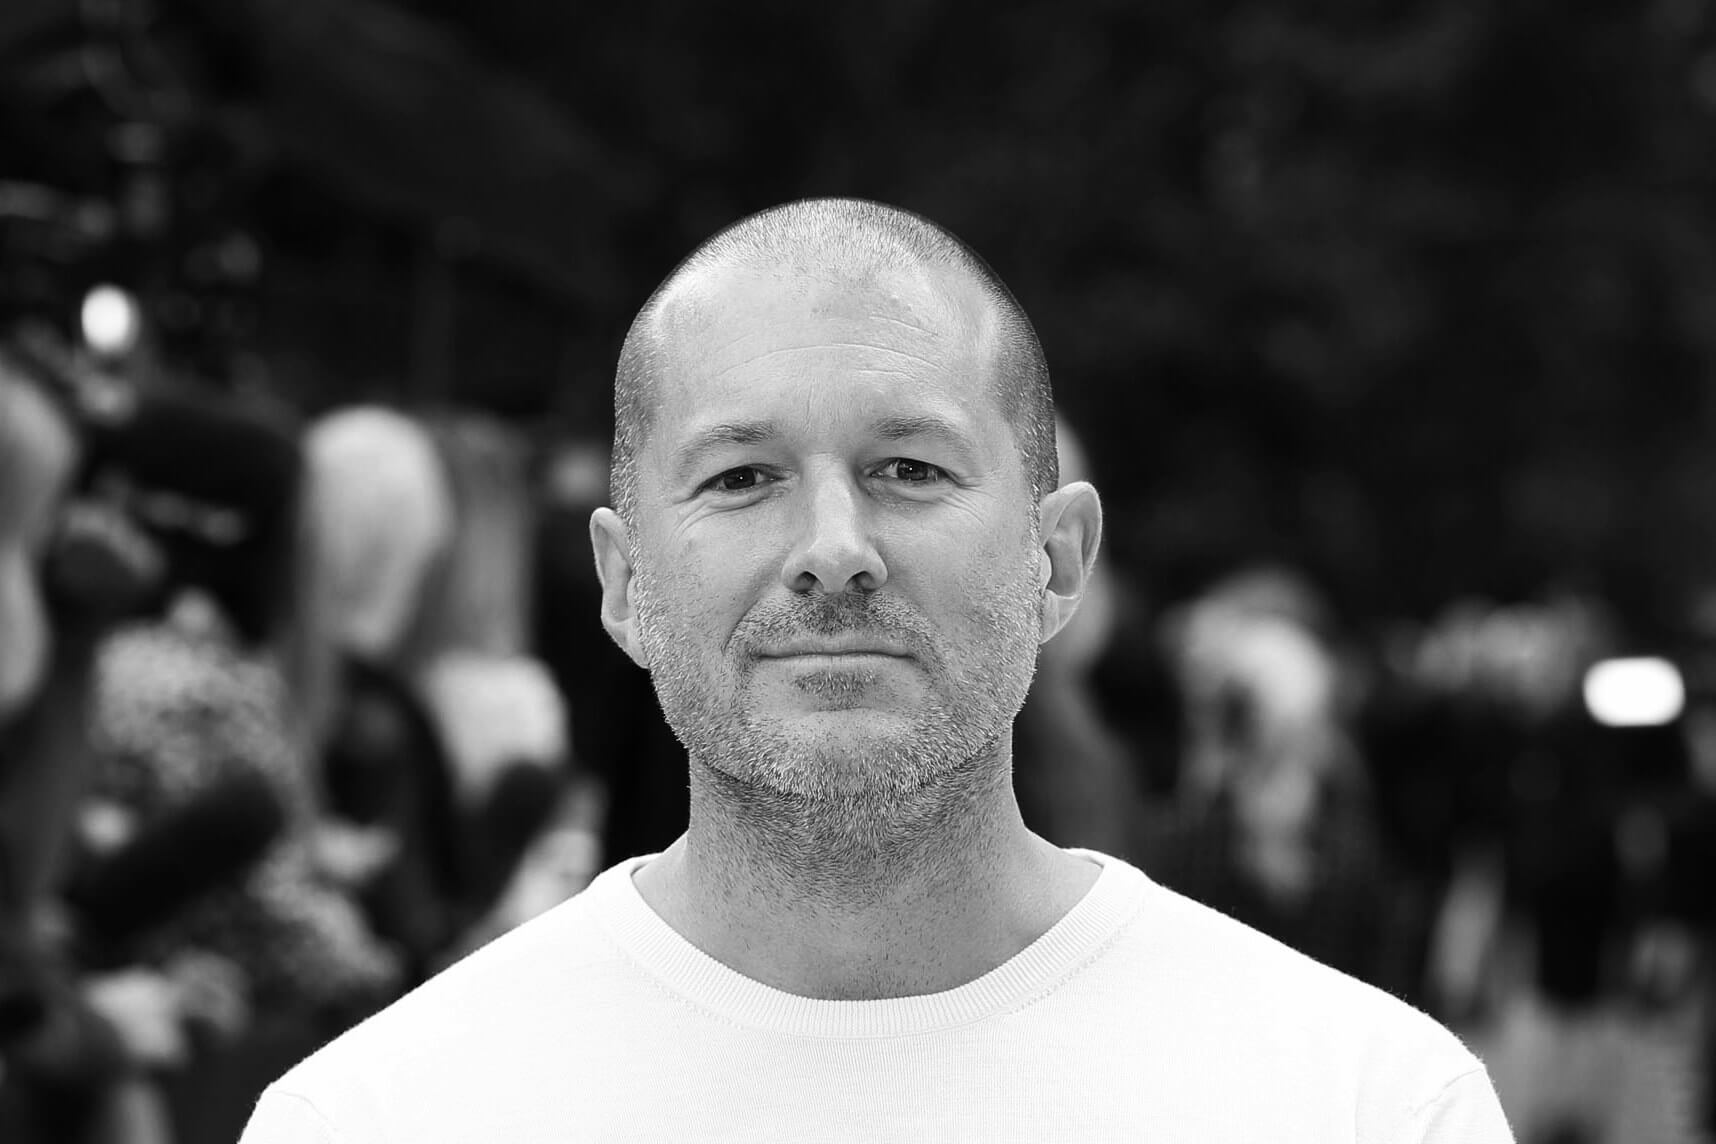 Apple says goodbye to design chief Jony Ive after 30 years